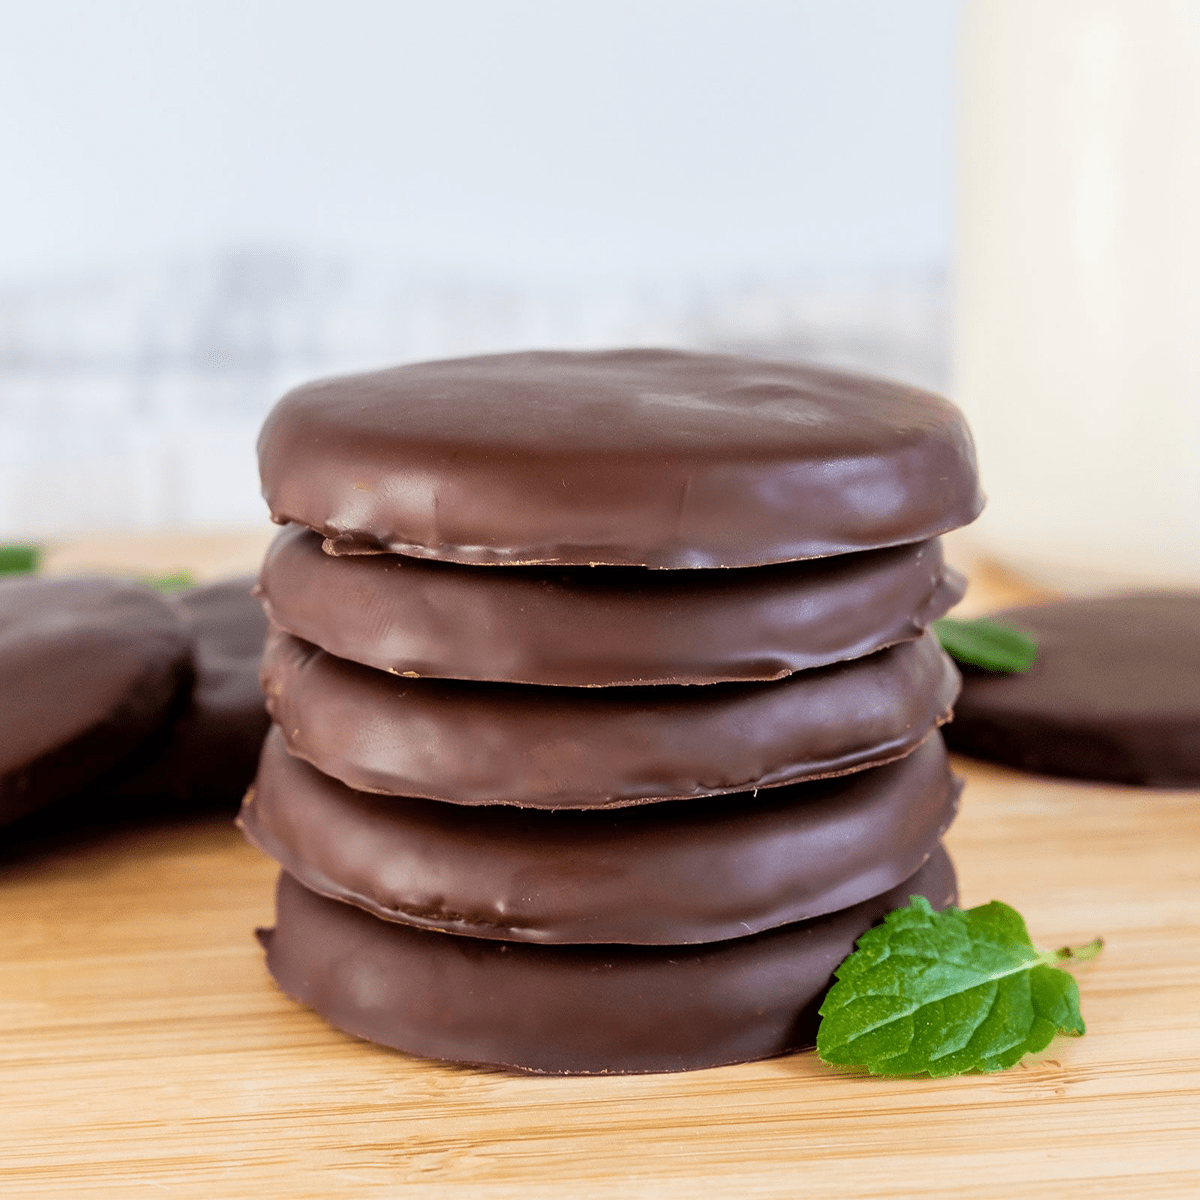 Inspired by: Thin Mints